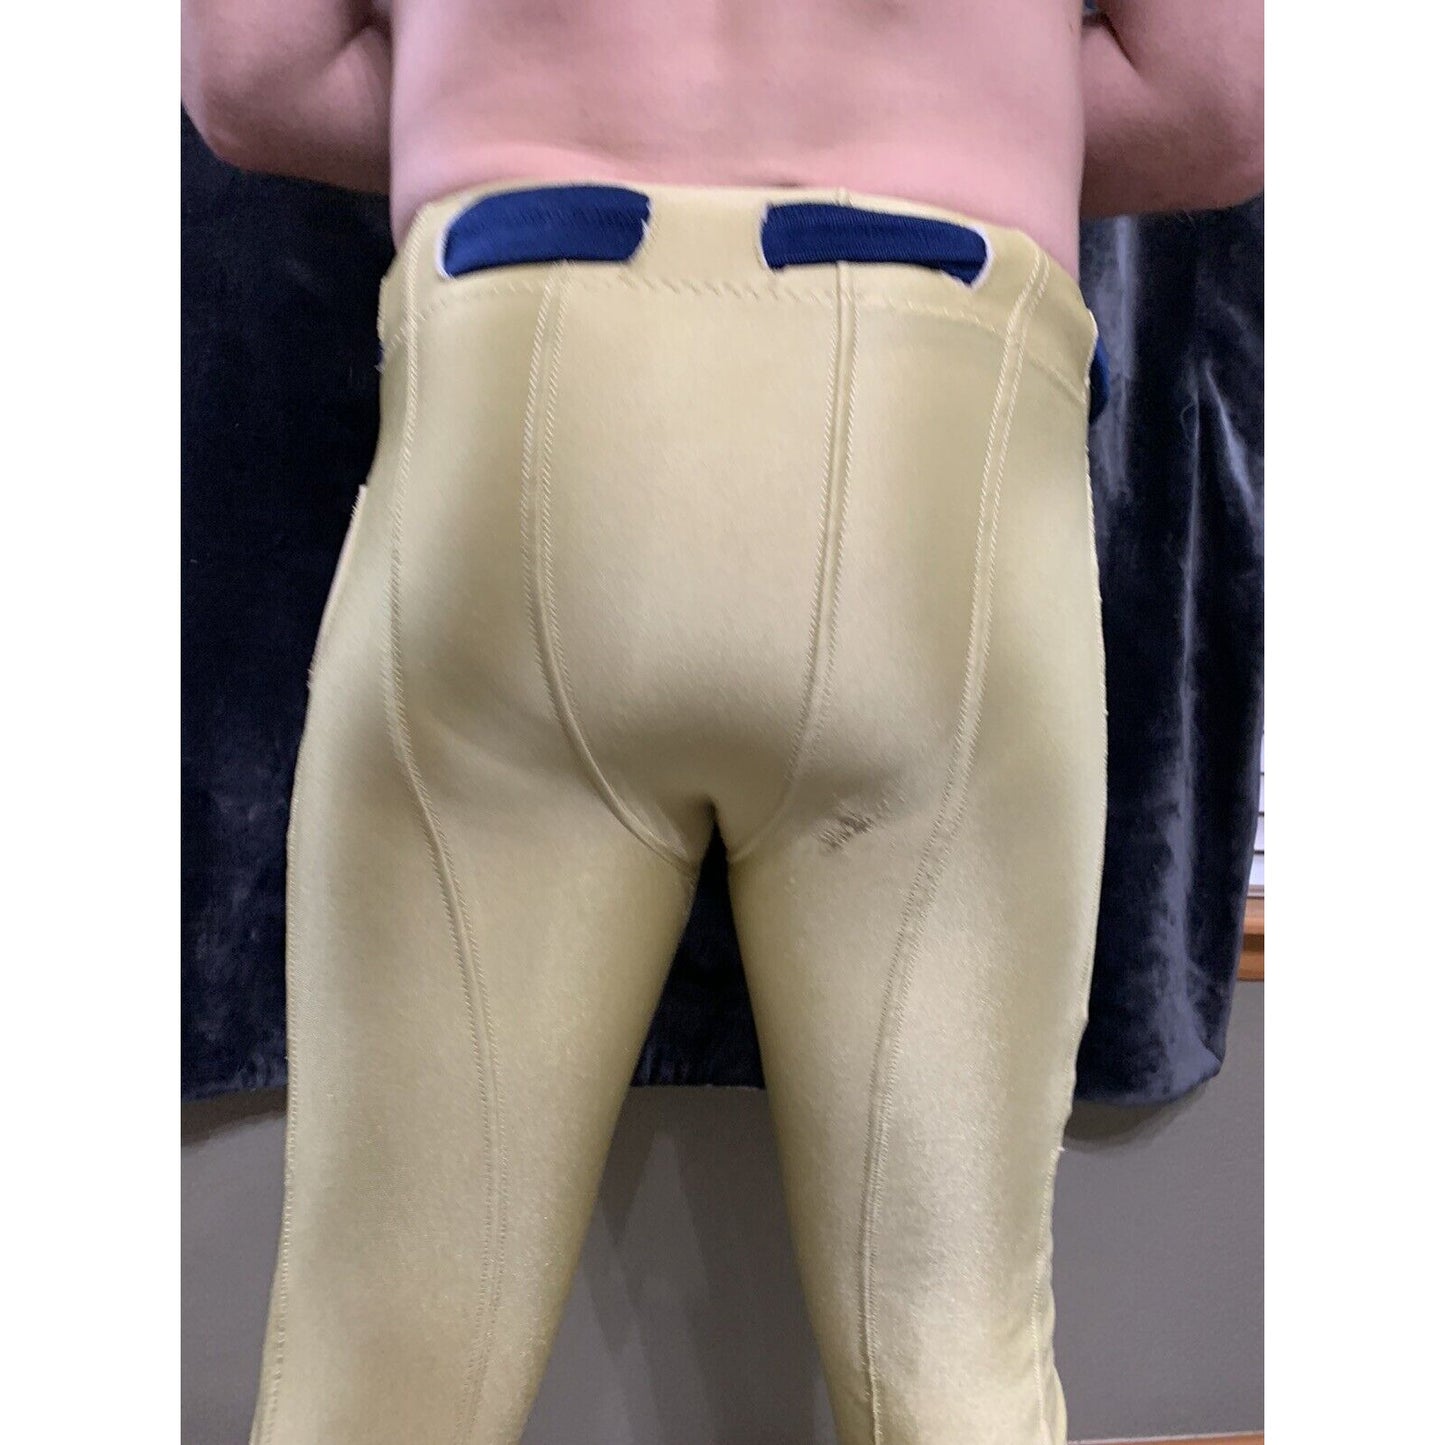 “ET” Football Pants Gold Russell Athletic Size 36